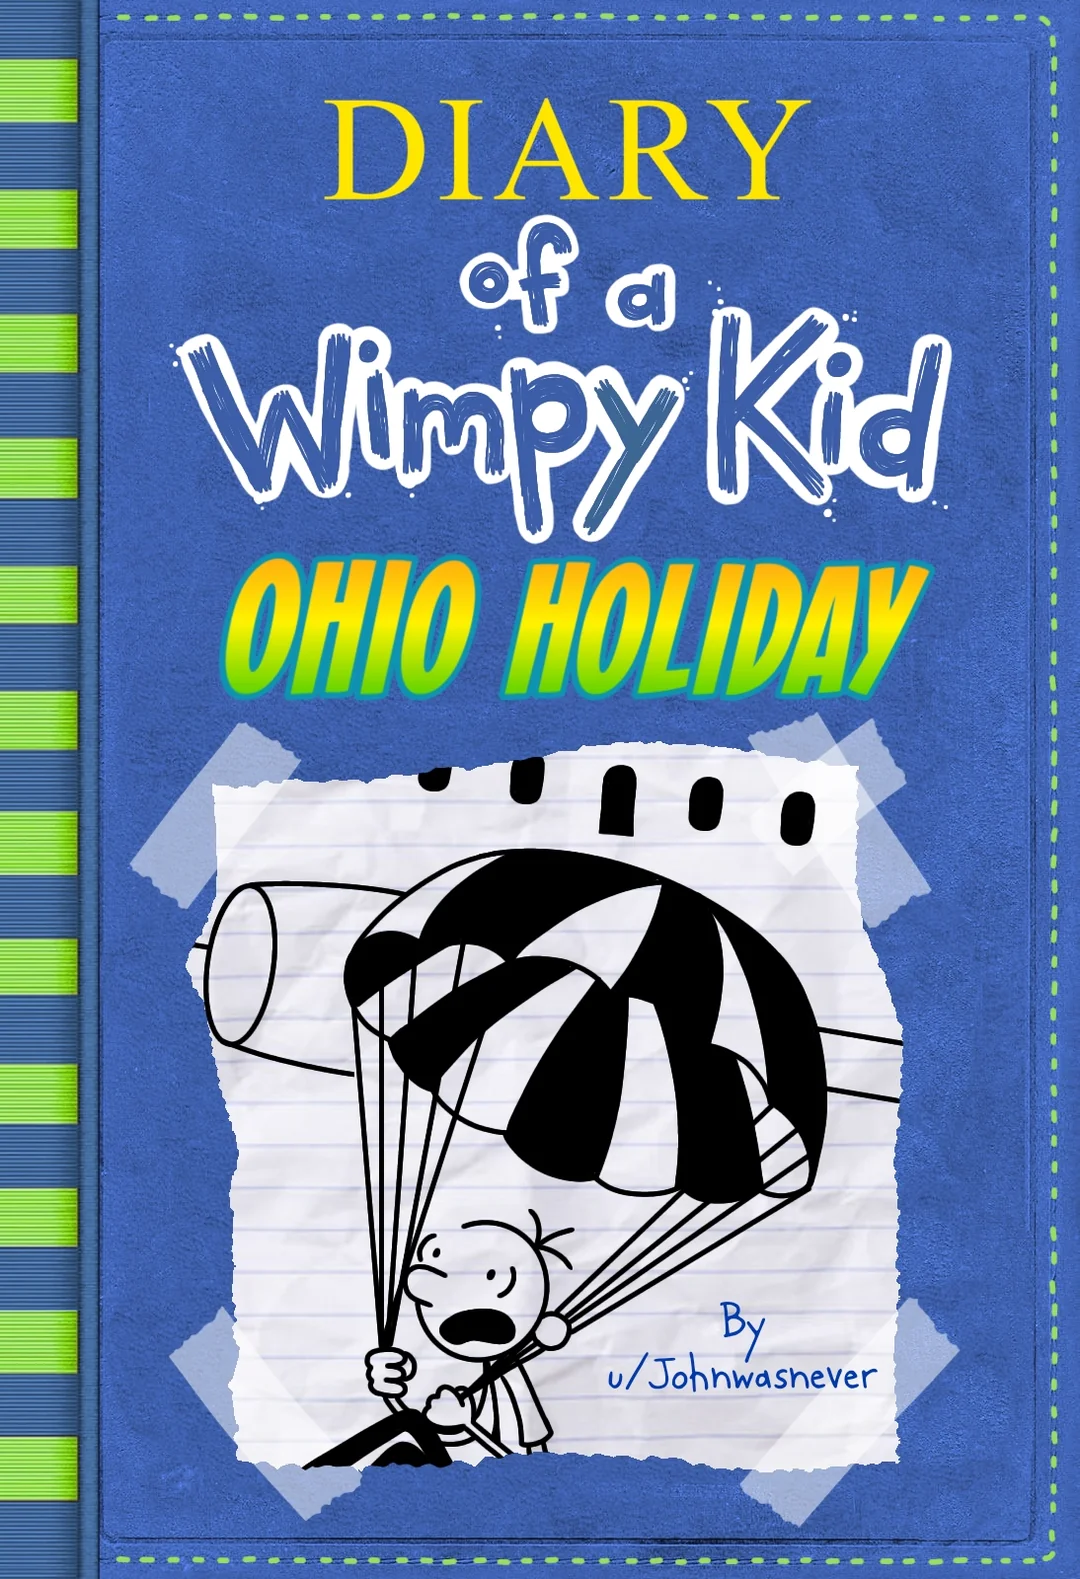 Diary of a Wimpy Kid: Ohio Holiday, Diary of a Wimpy Kid Fanfictions Wiki